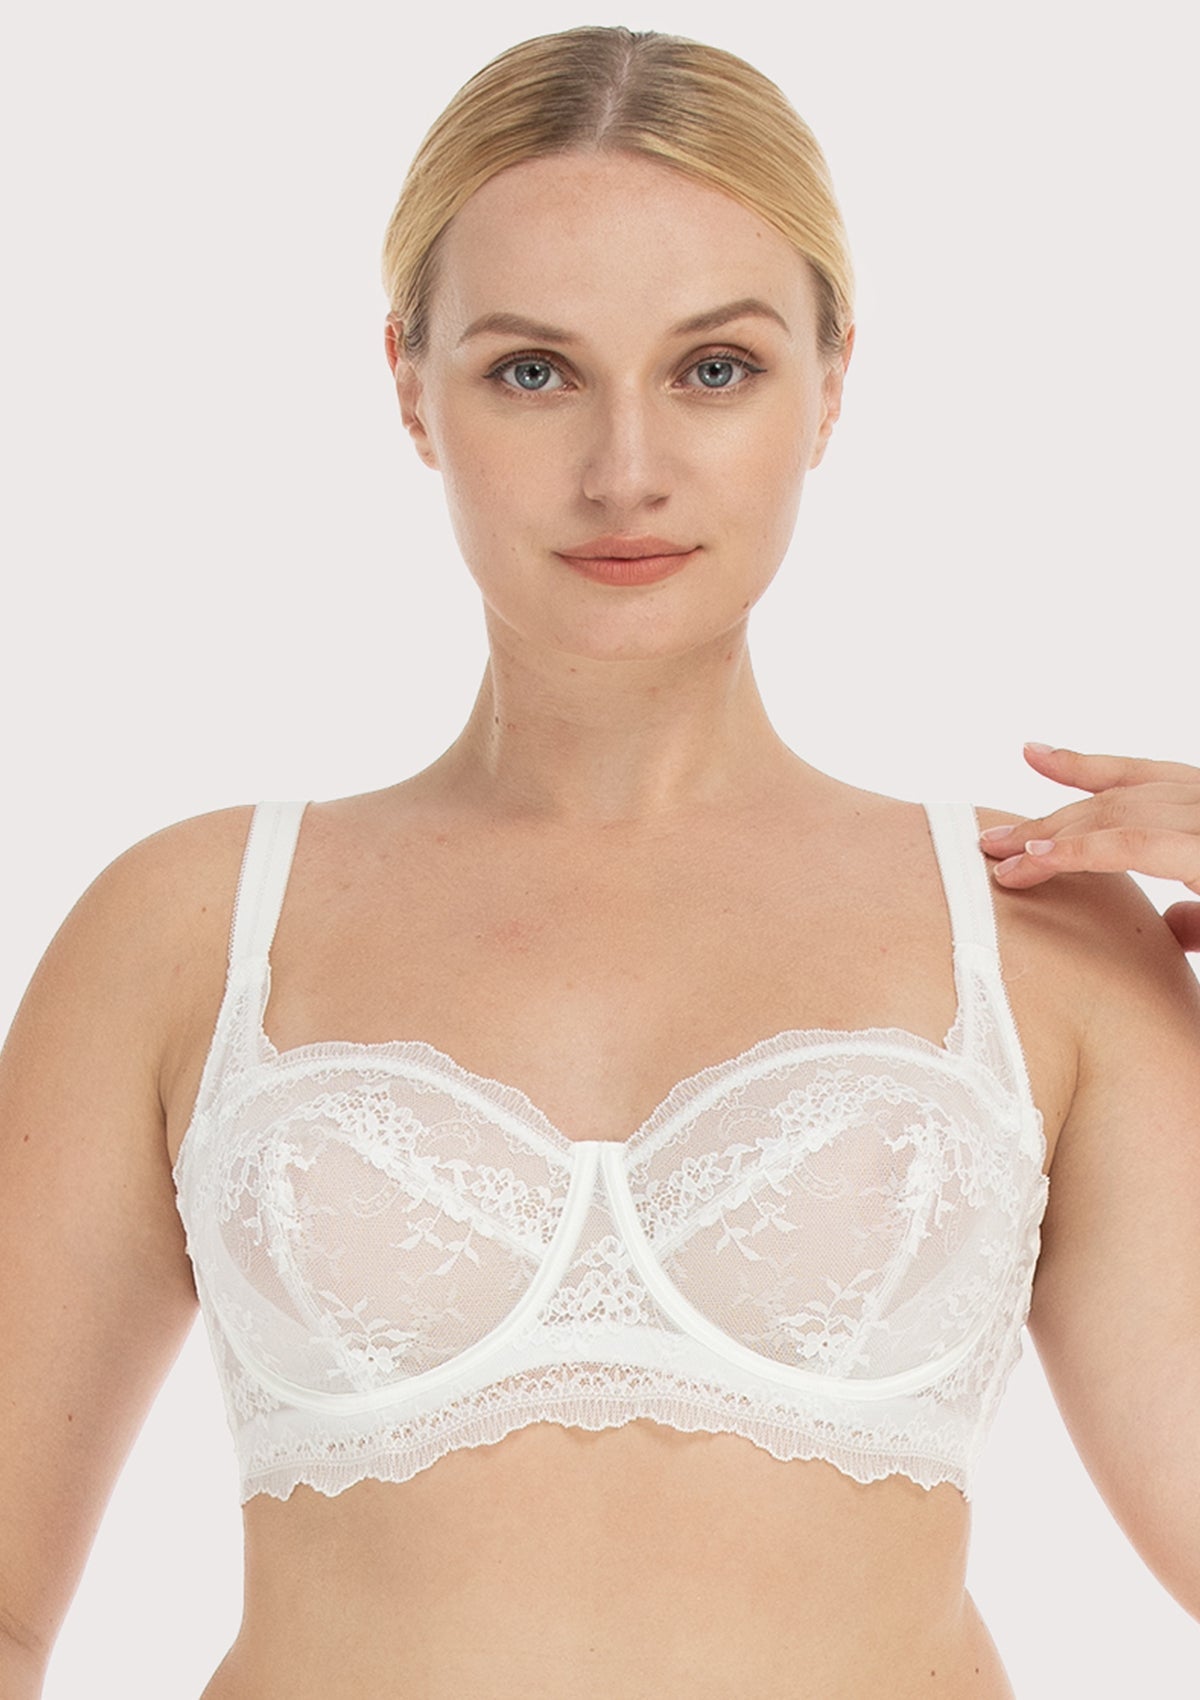 HSIA I Do Floral Lace Bridal Balconette Beautiful Bra For Special Day - White / 40 / C